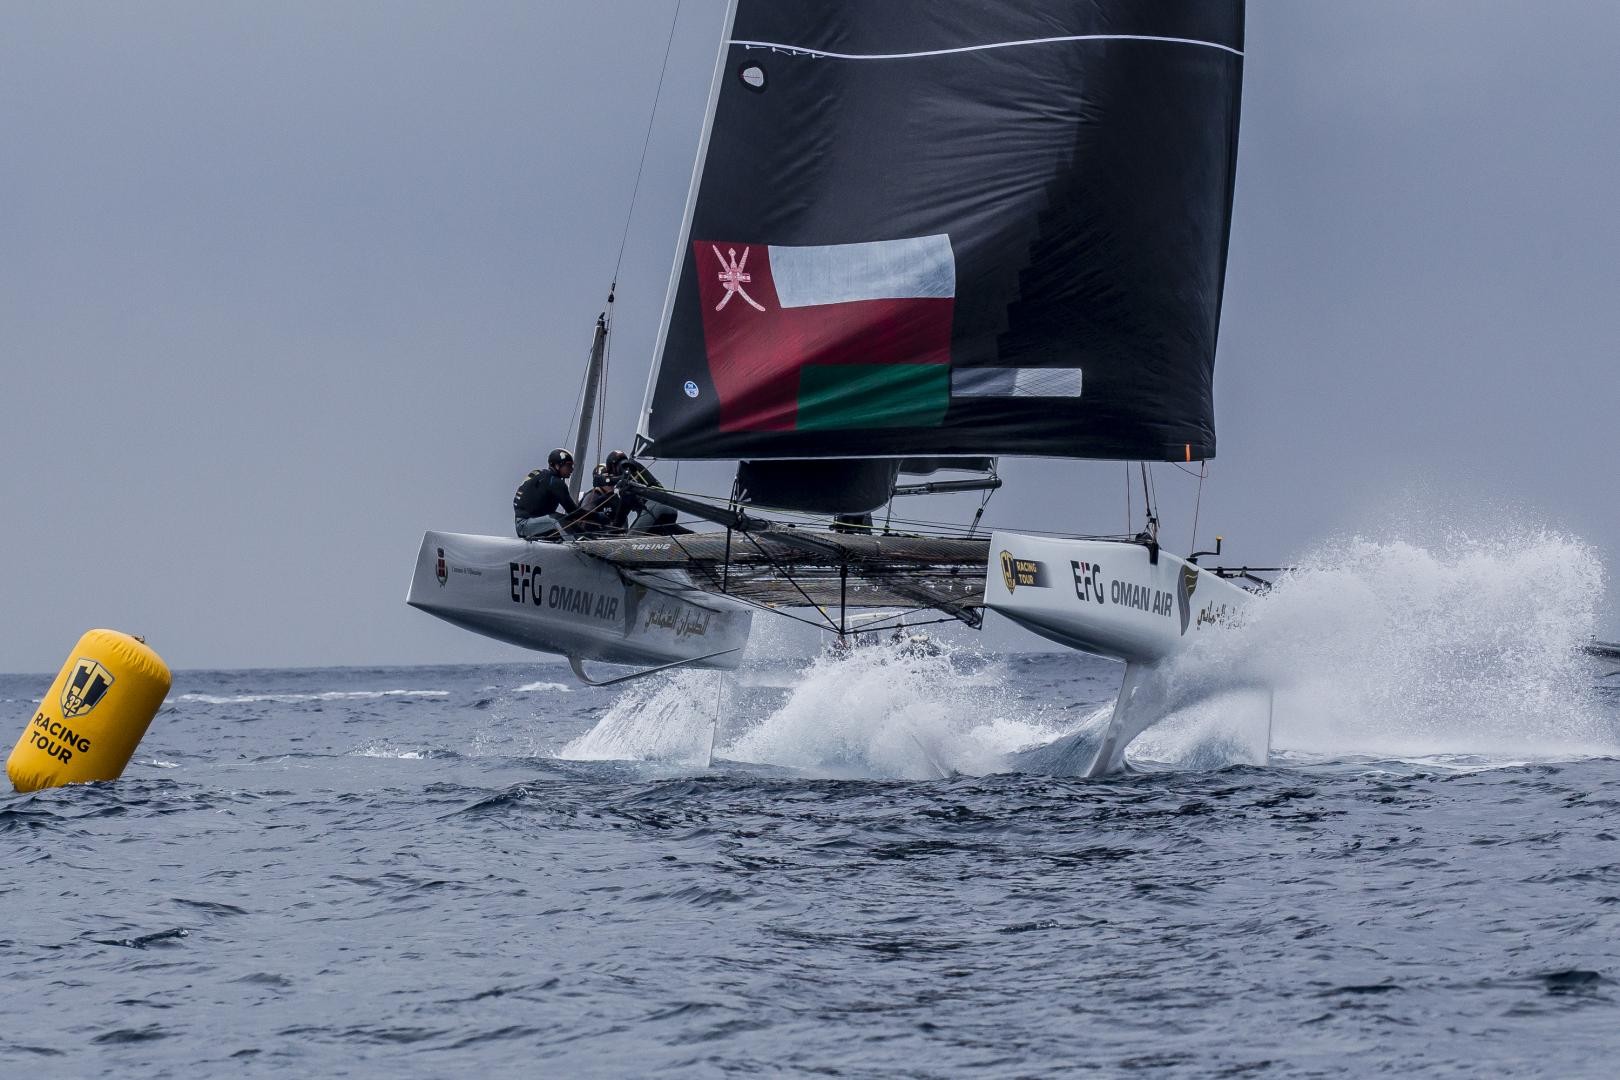 Hat trick for Oman Air on day three of GC32 Villasimius Cup